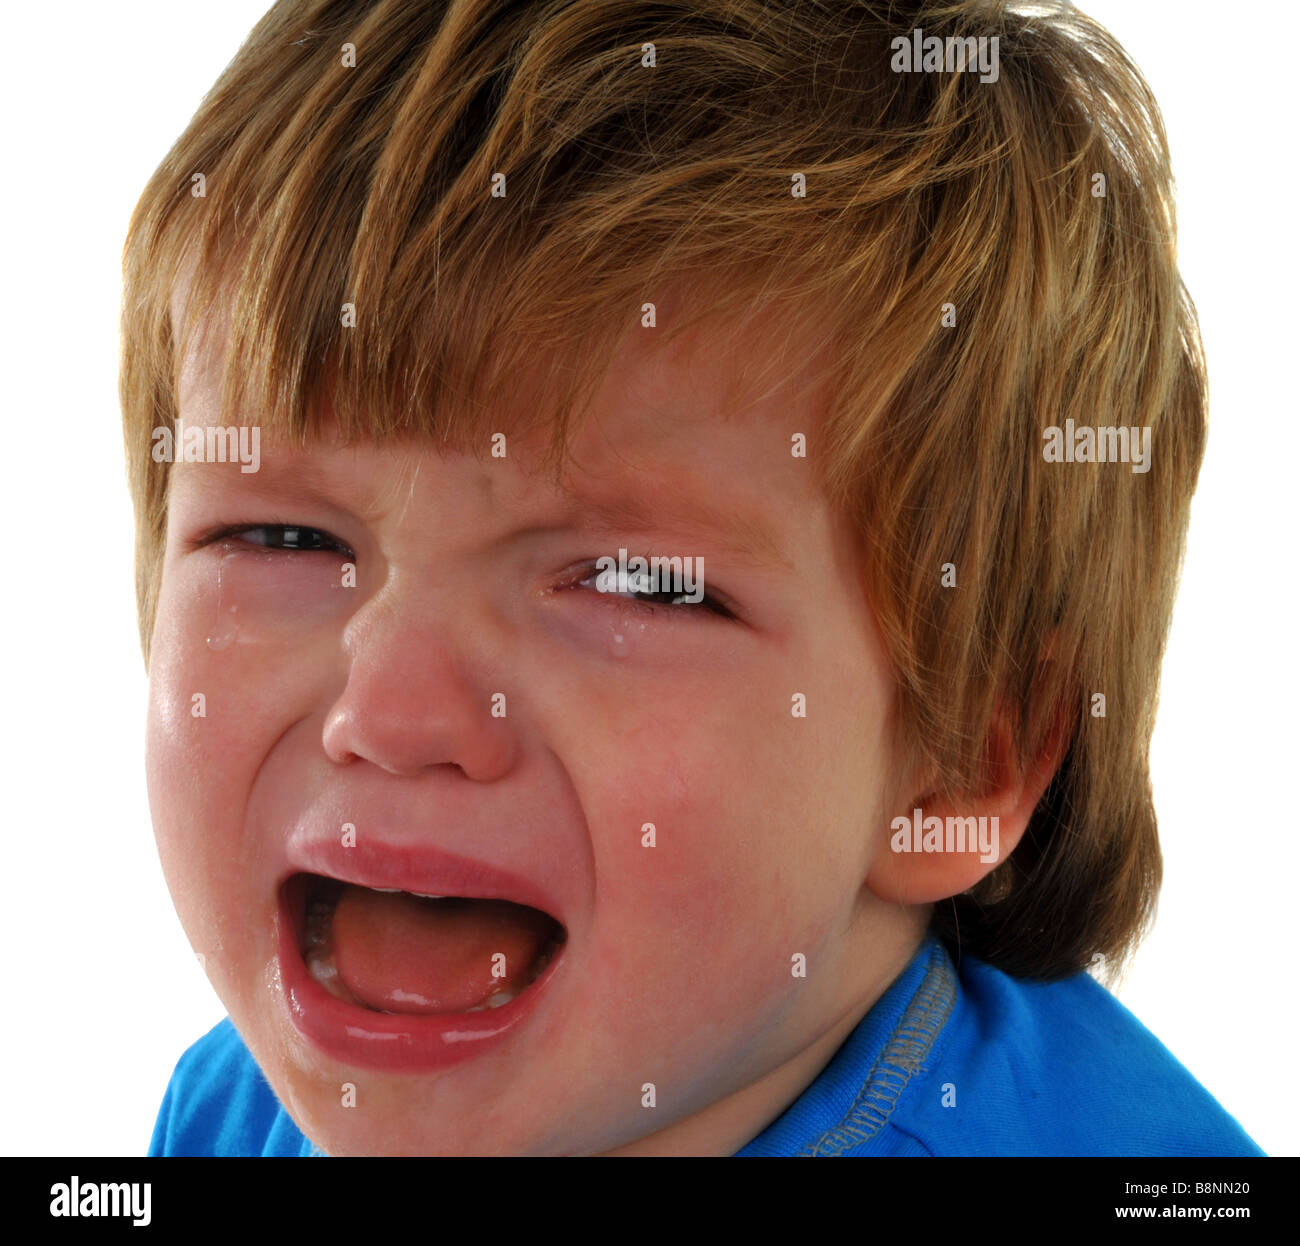 Crying toddler, Crying boy, tears Stock Photo